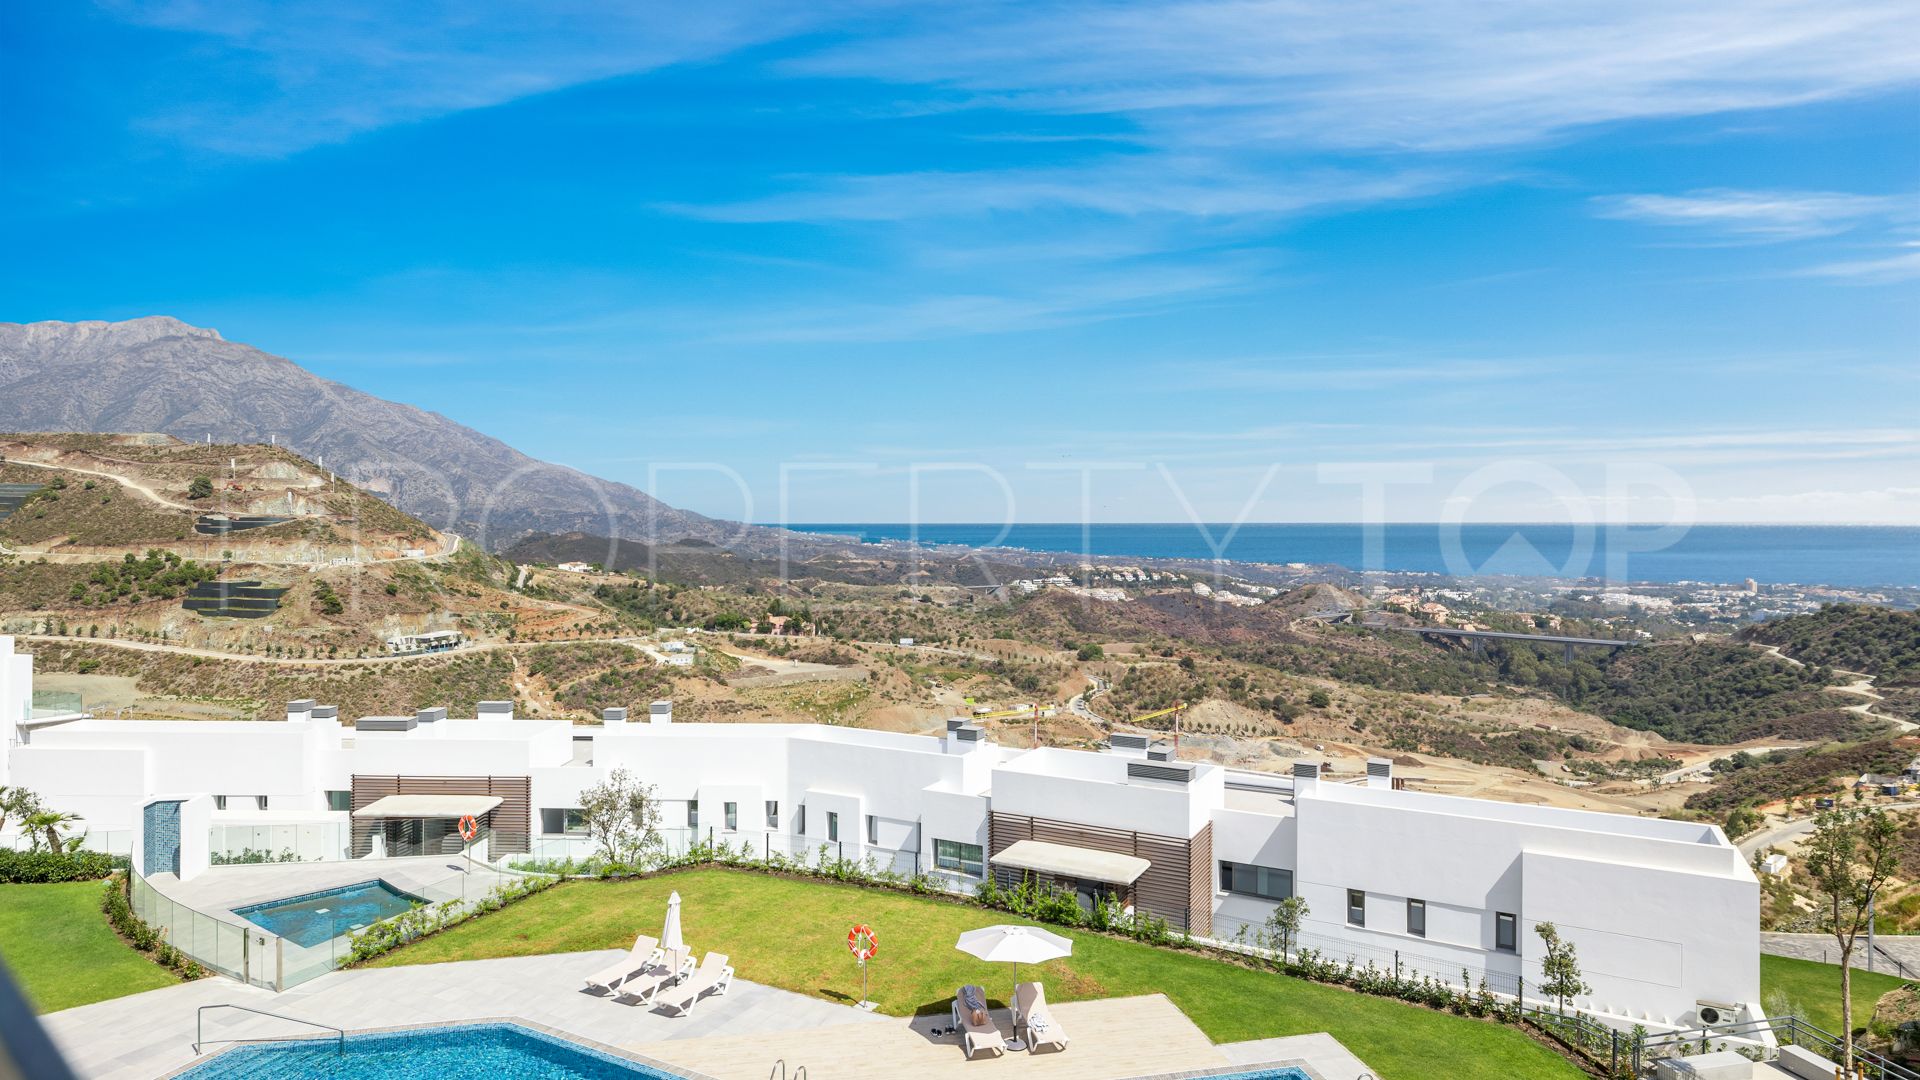 For sale La Quinta penthouse with 4 bedrooms